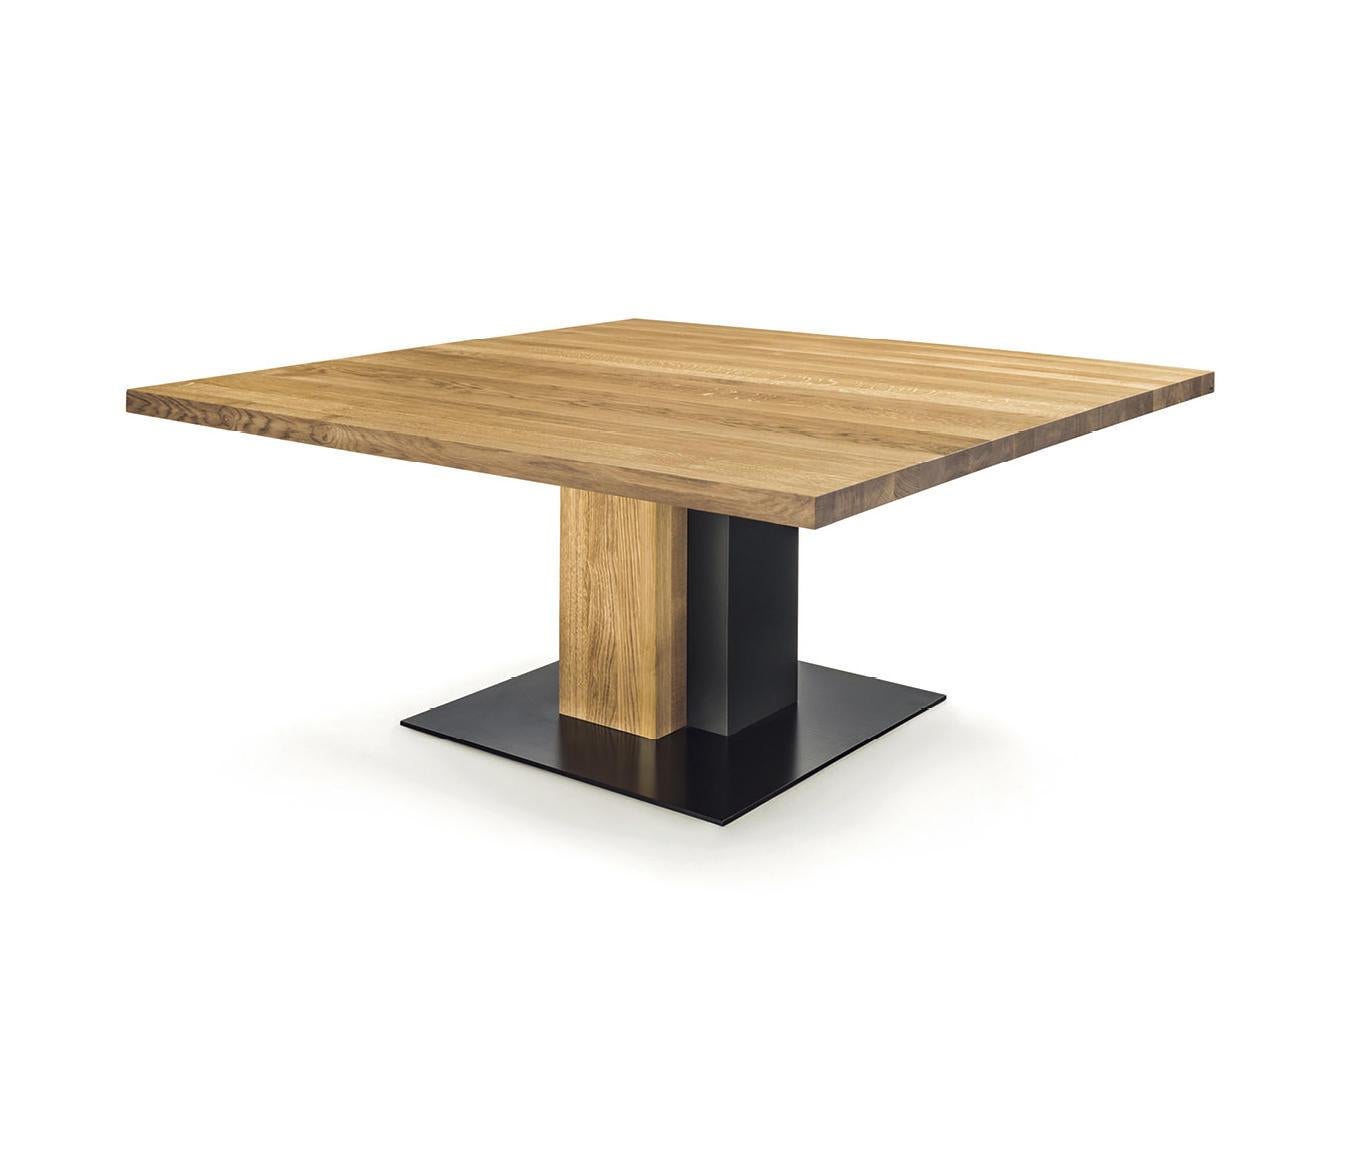 Italian Rectangular Table Made to Order in Solid Oak with Knots & Lacquered Iron For Sale